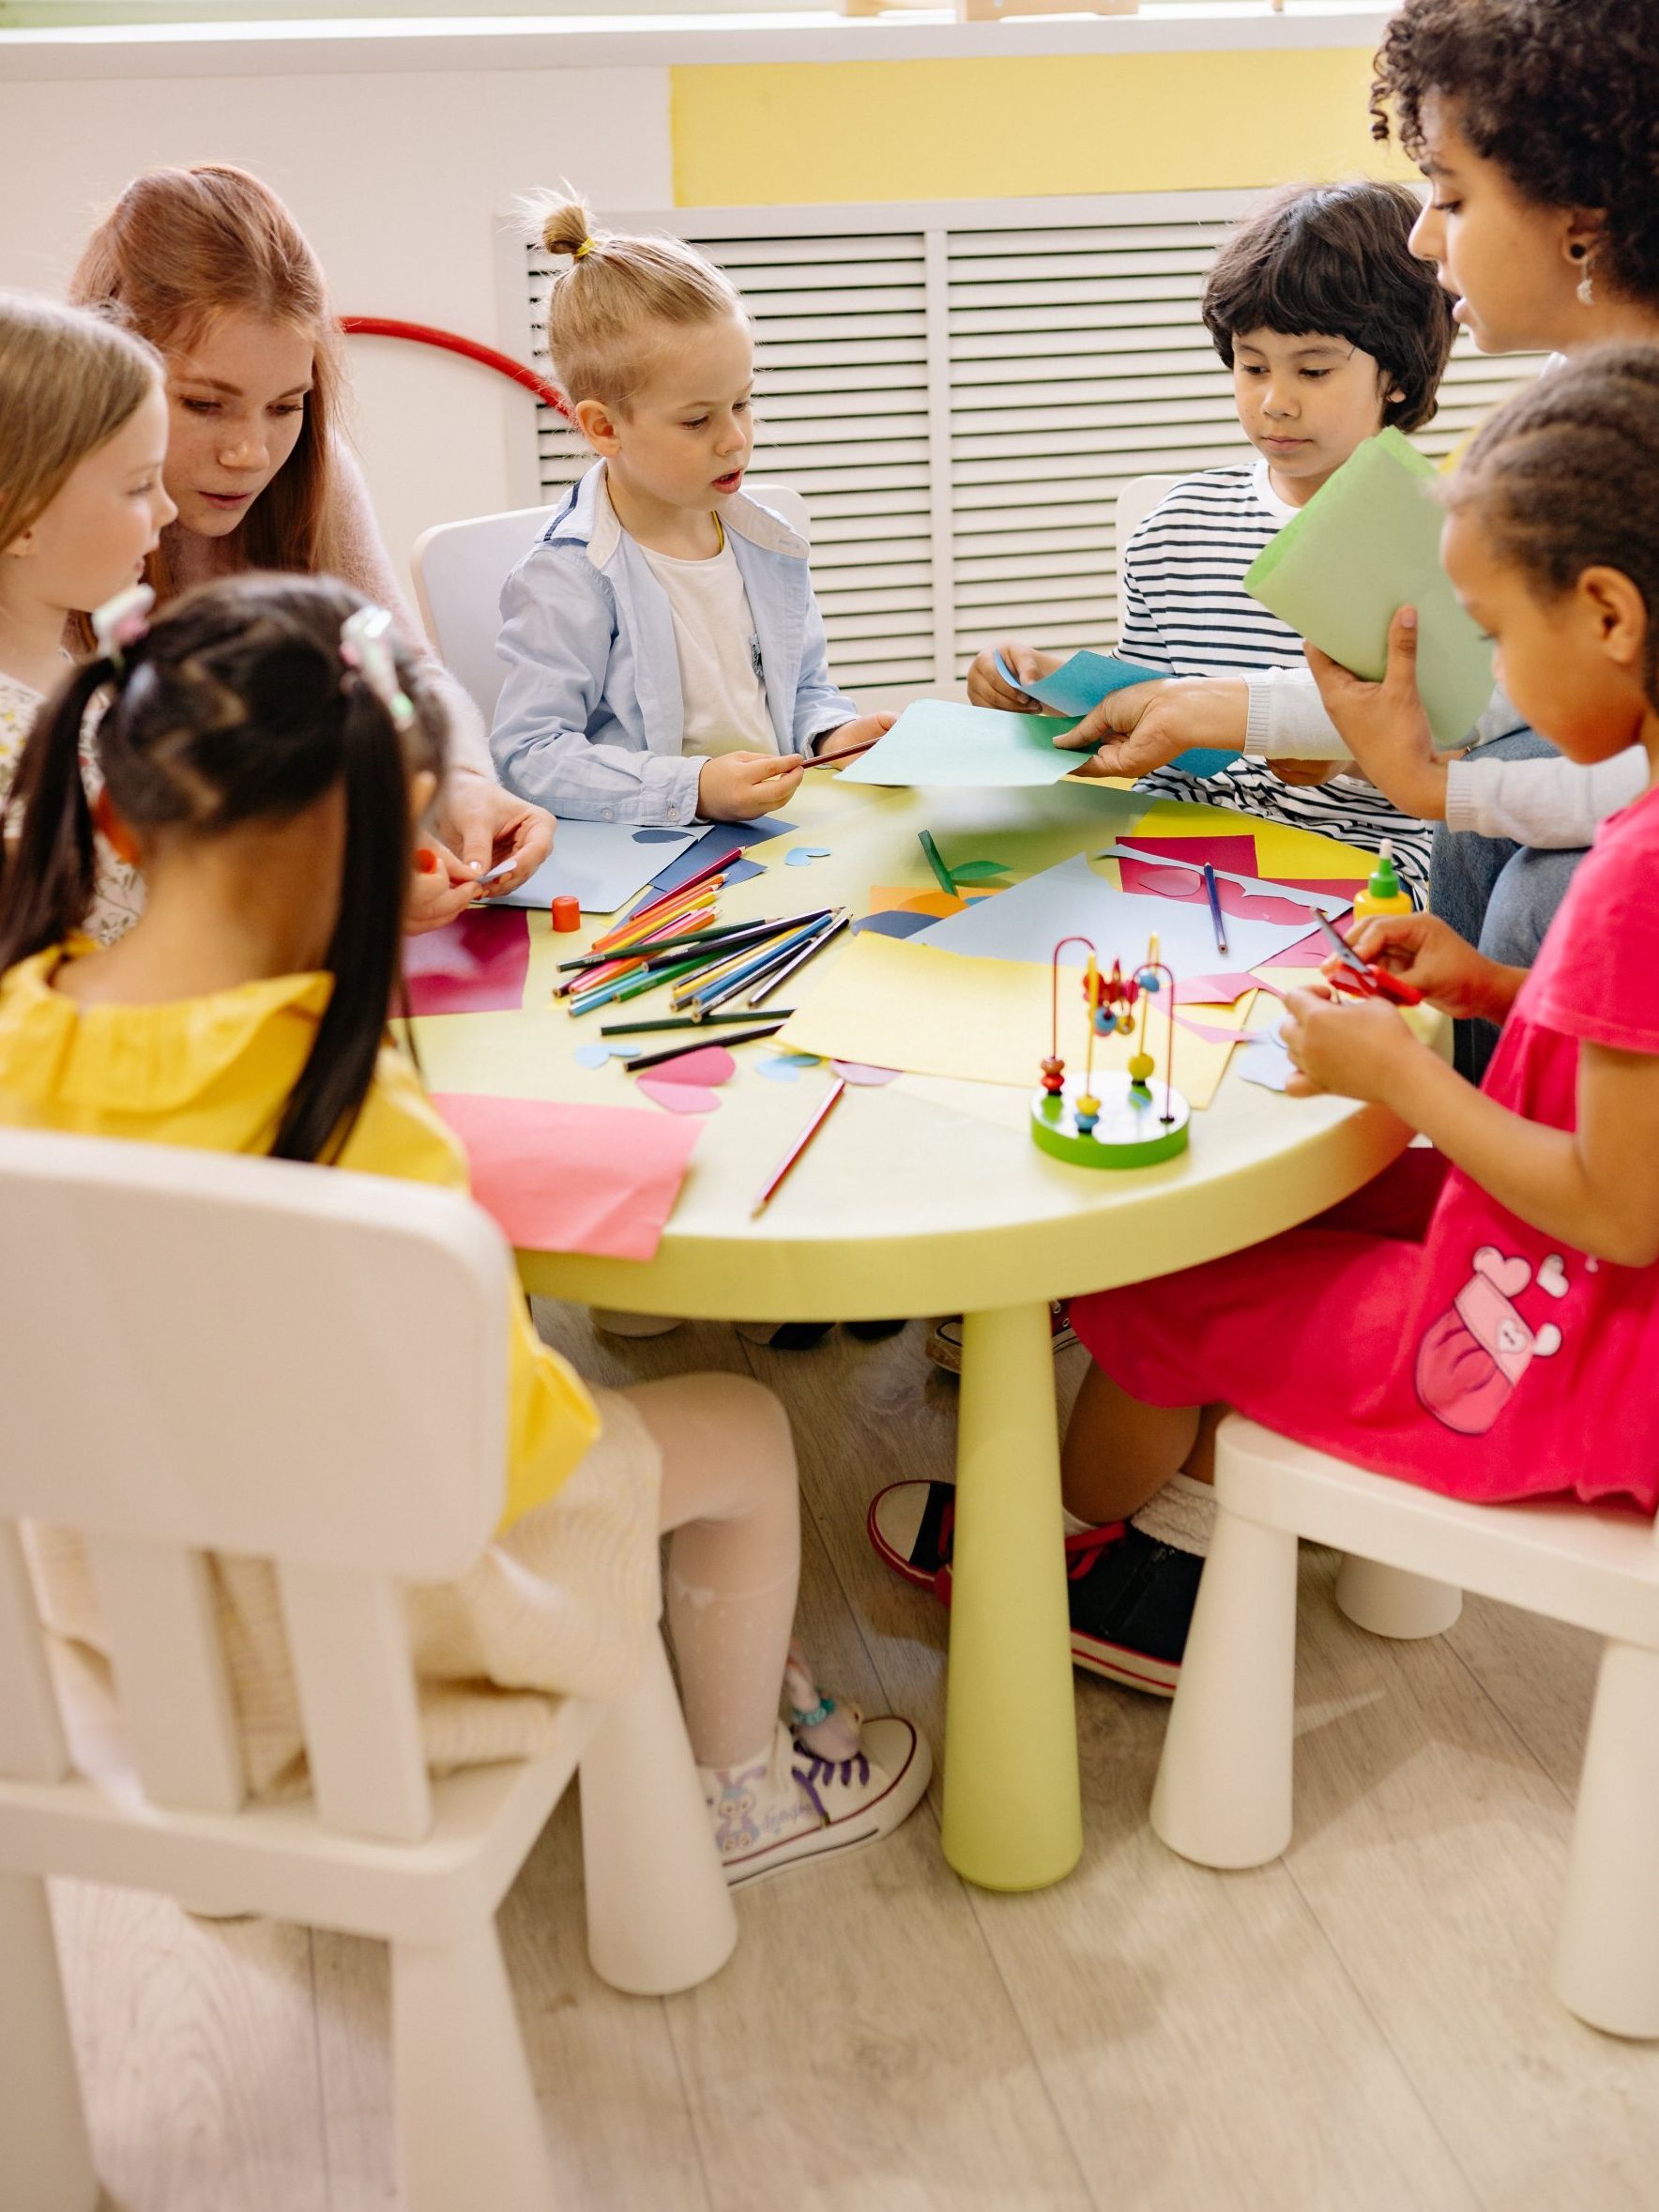 A group of children are sitting around a table playing with toys.